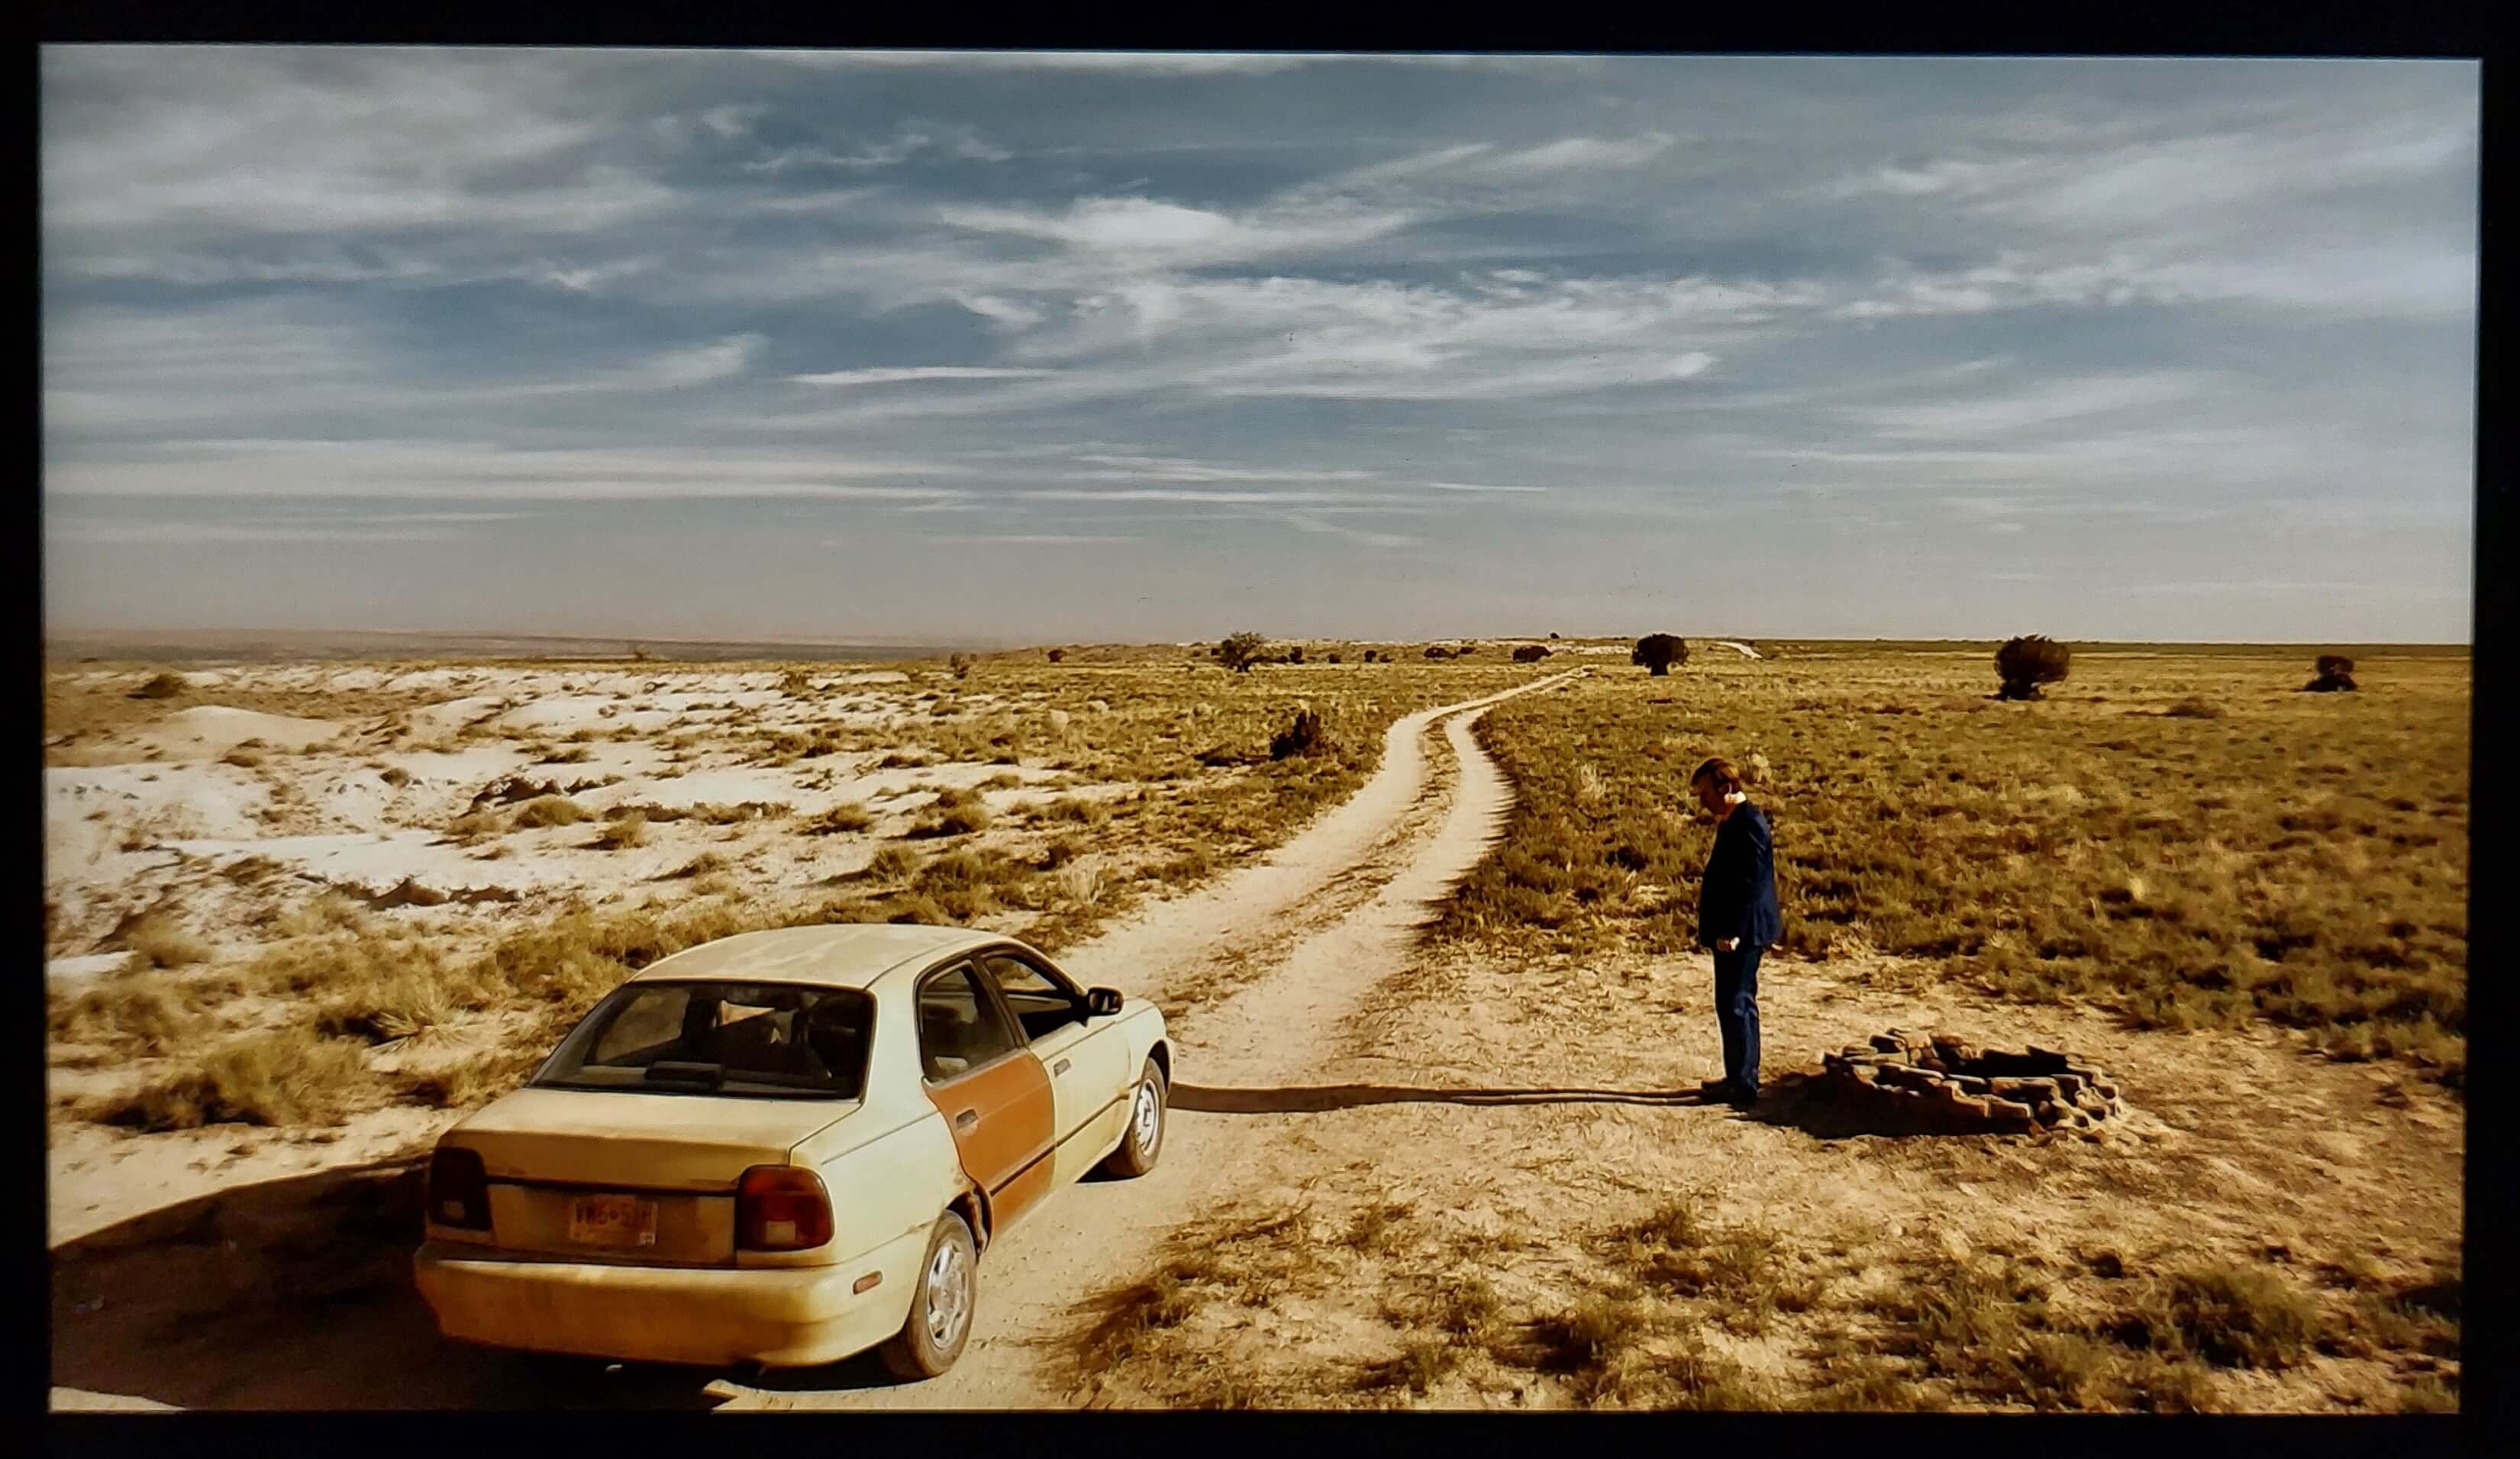 Saul standing in the desert next to his car - Captured from Netflix